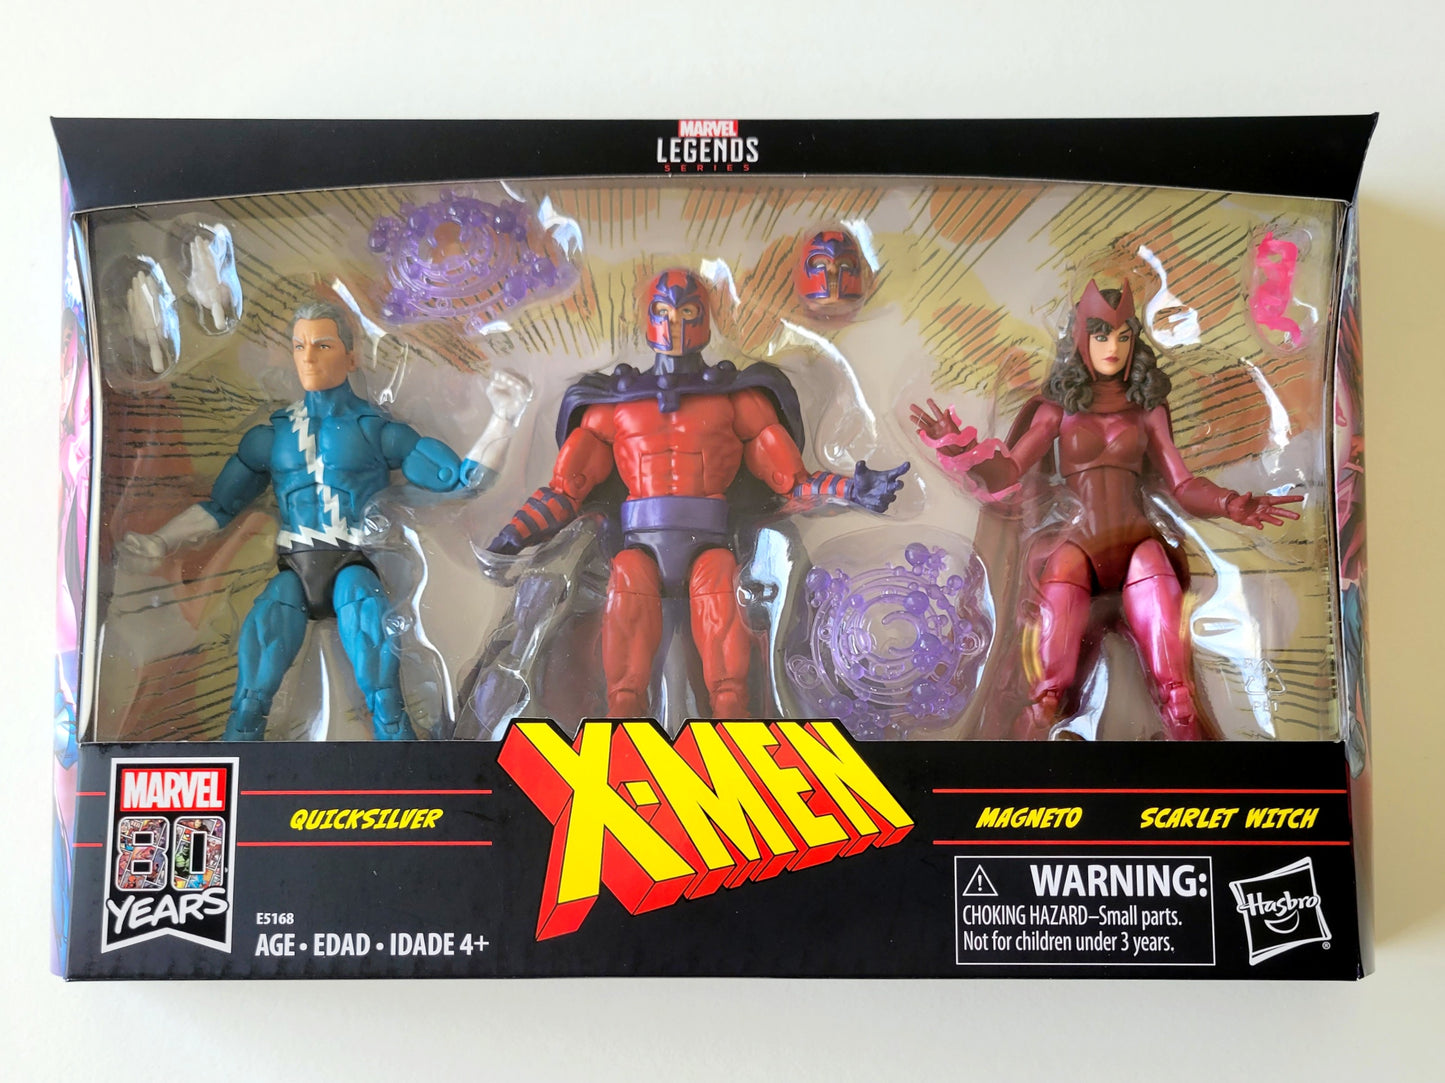 Marvel Legends Family Matters 3-Pack (Quicksilver, Magneto, Scarlet Witch)